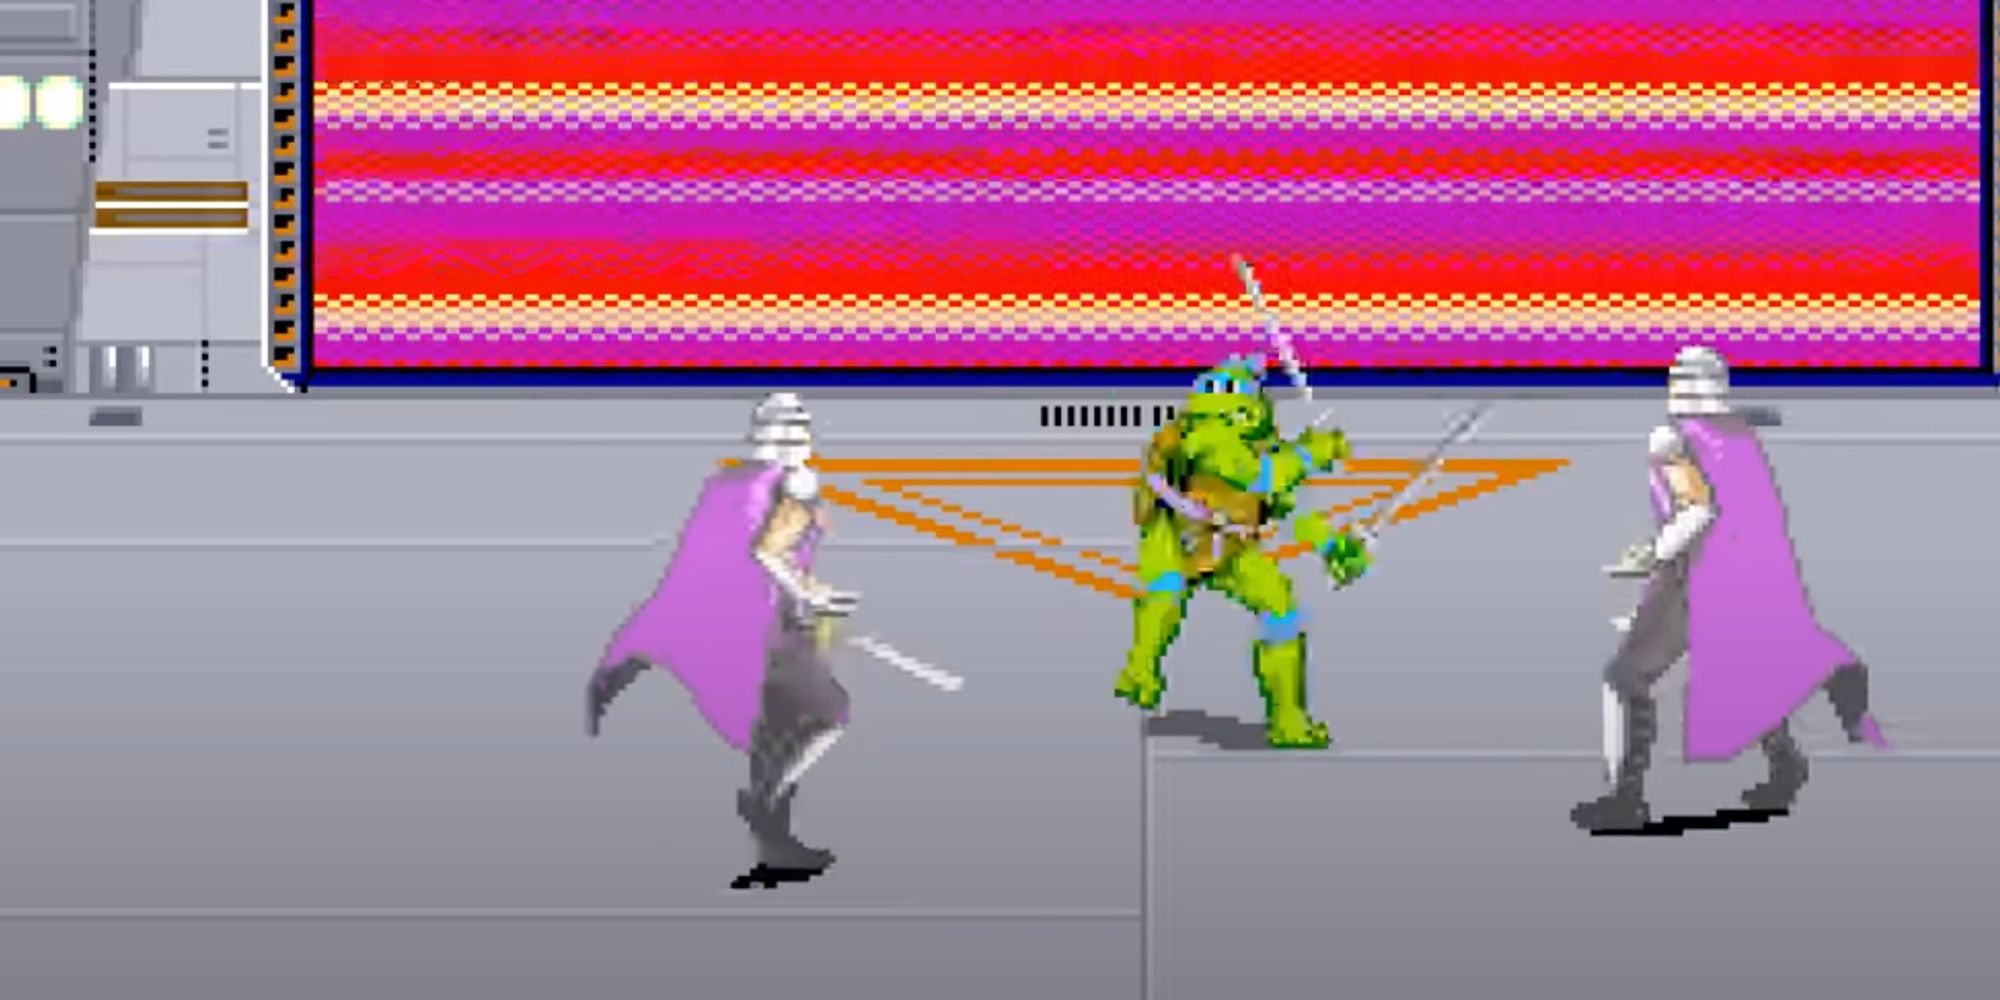 The first TMNT arcade game will be in Konami's Cowabunga Collection